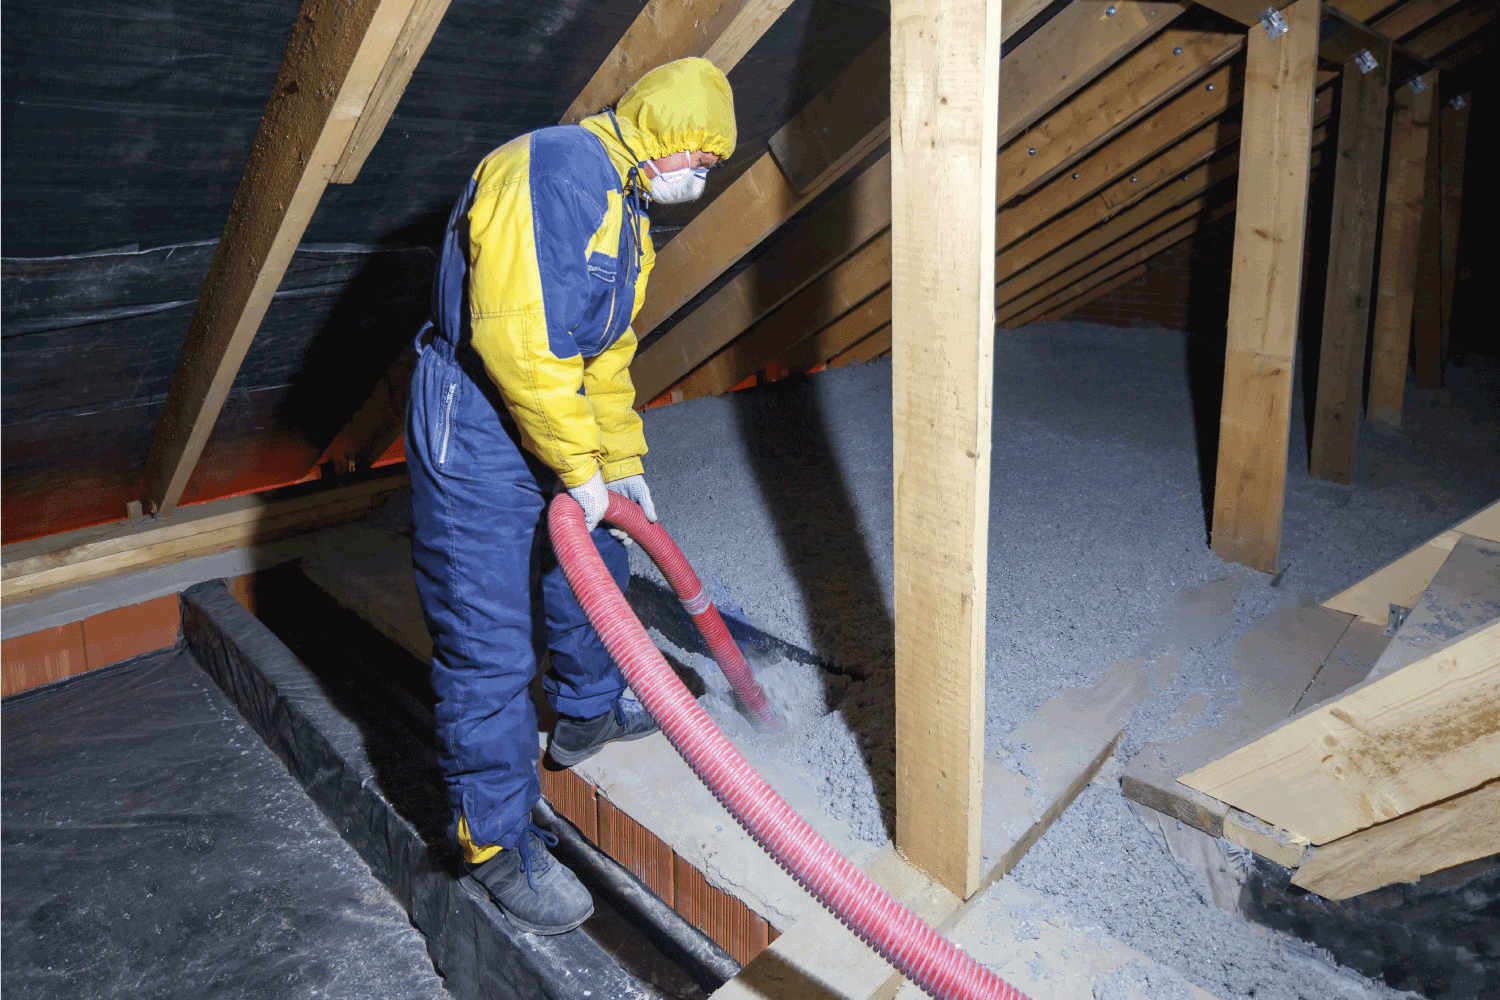 Insulation of the attic with cellulose insulation. Spraying from a hose